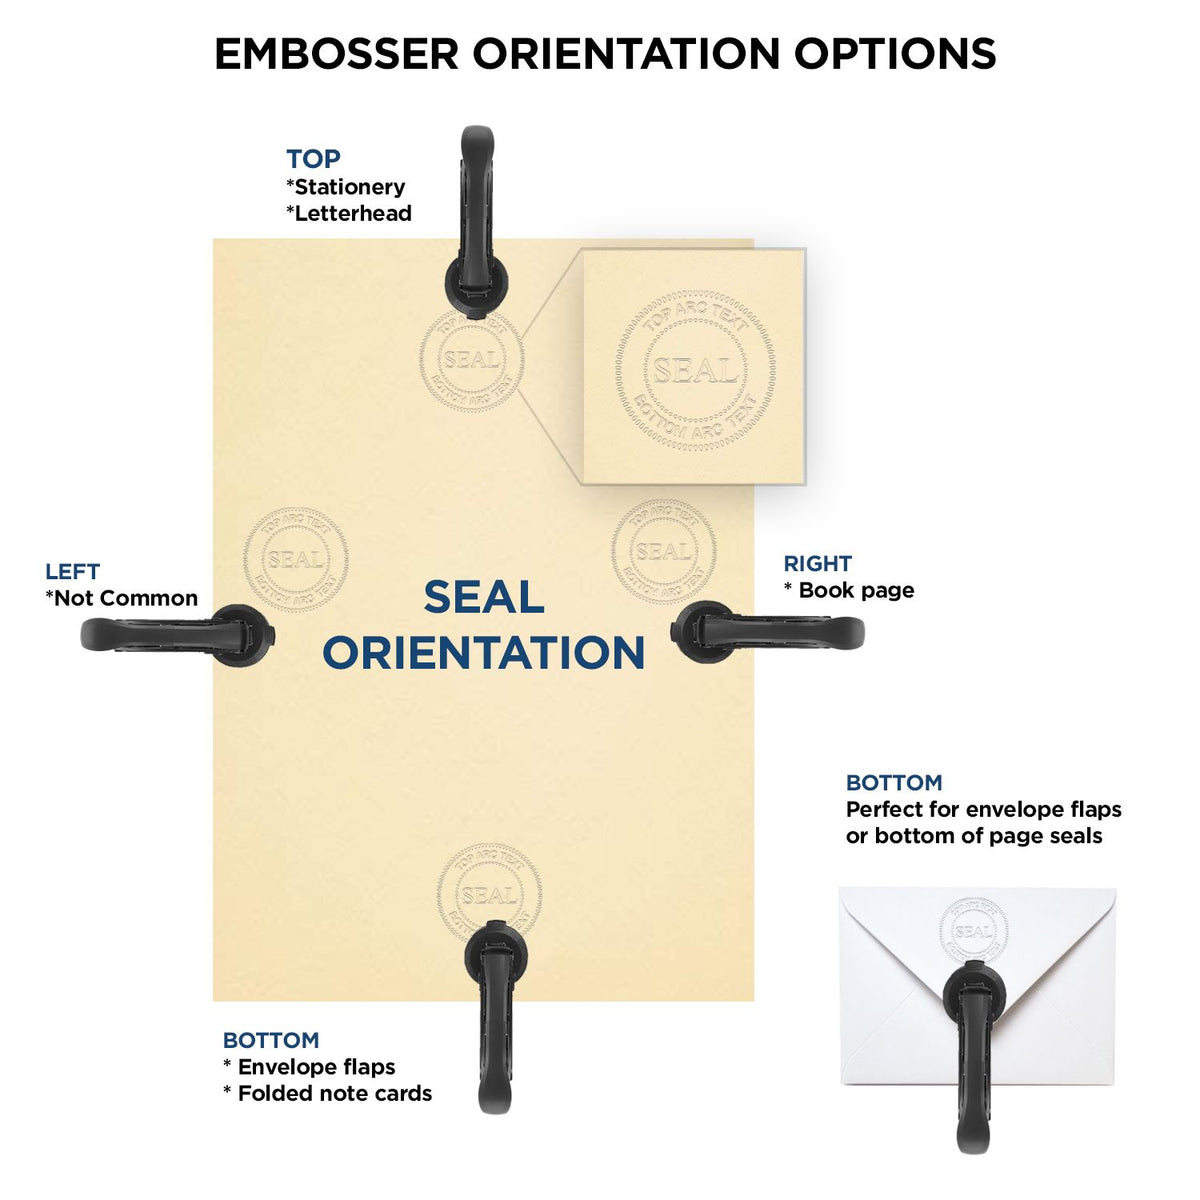 An infographic for the Heavy Duty Cast Iron Idaho Architect Embosser showing embosser orientation, this is showing examples of a top, bottom, right and left insert.